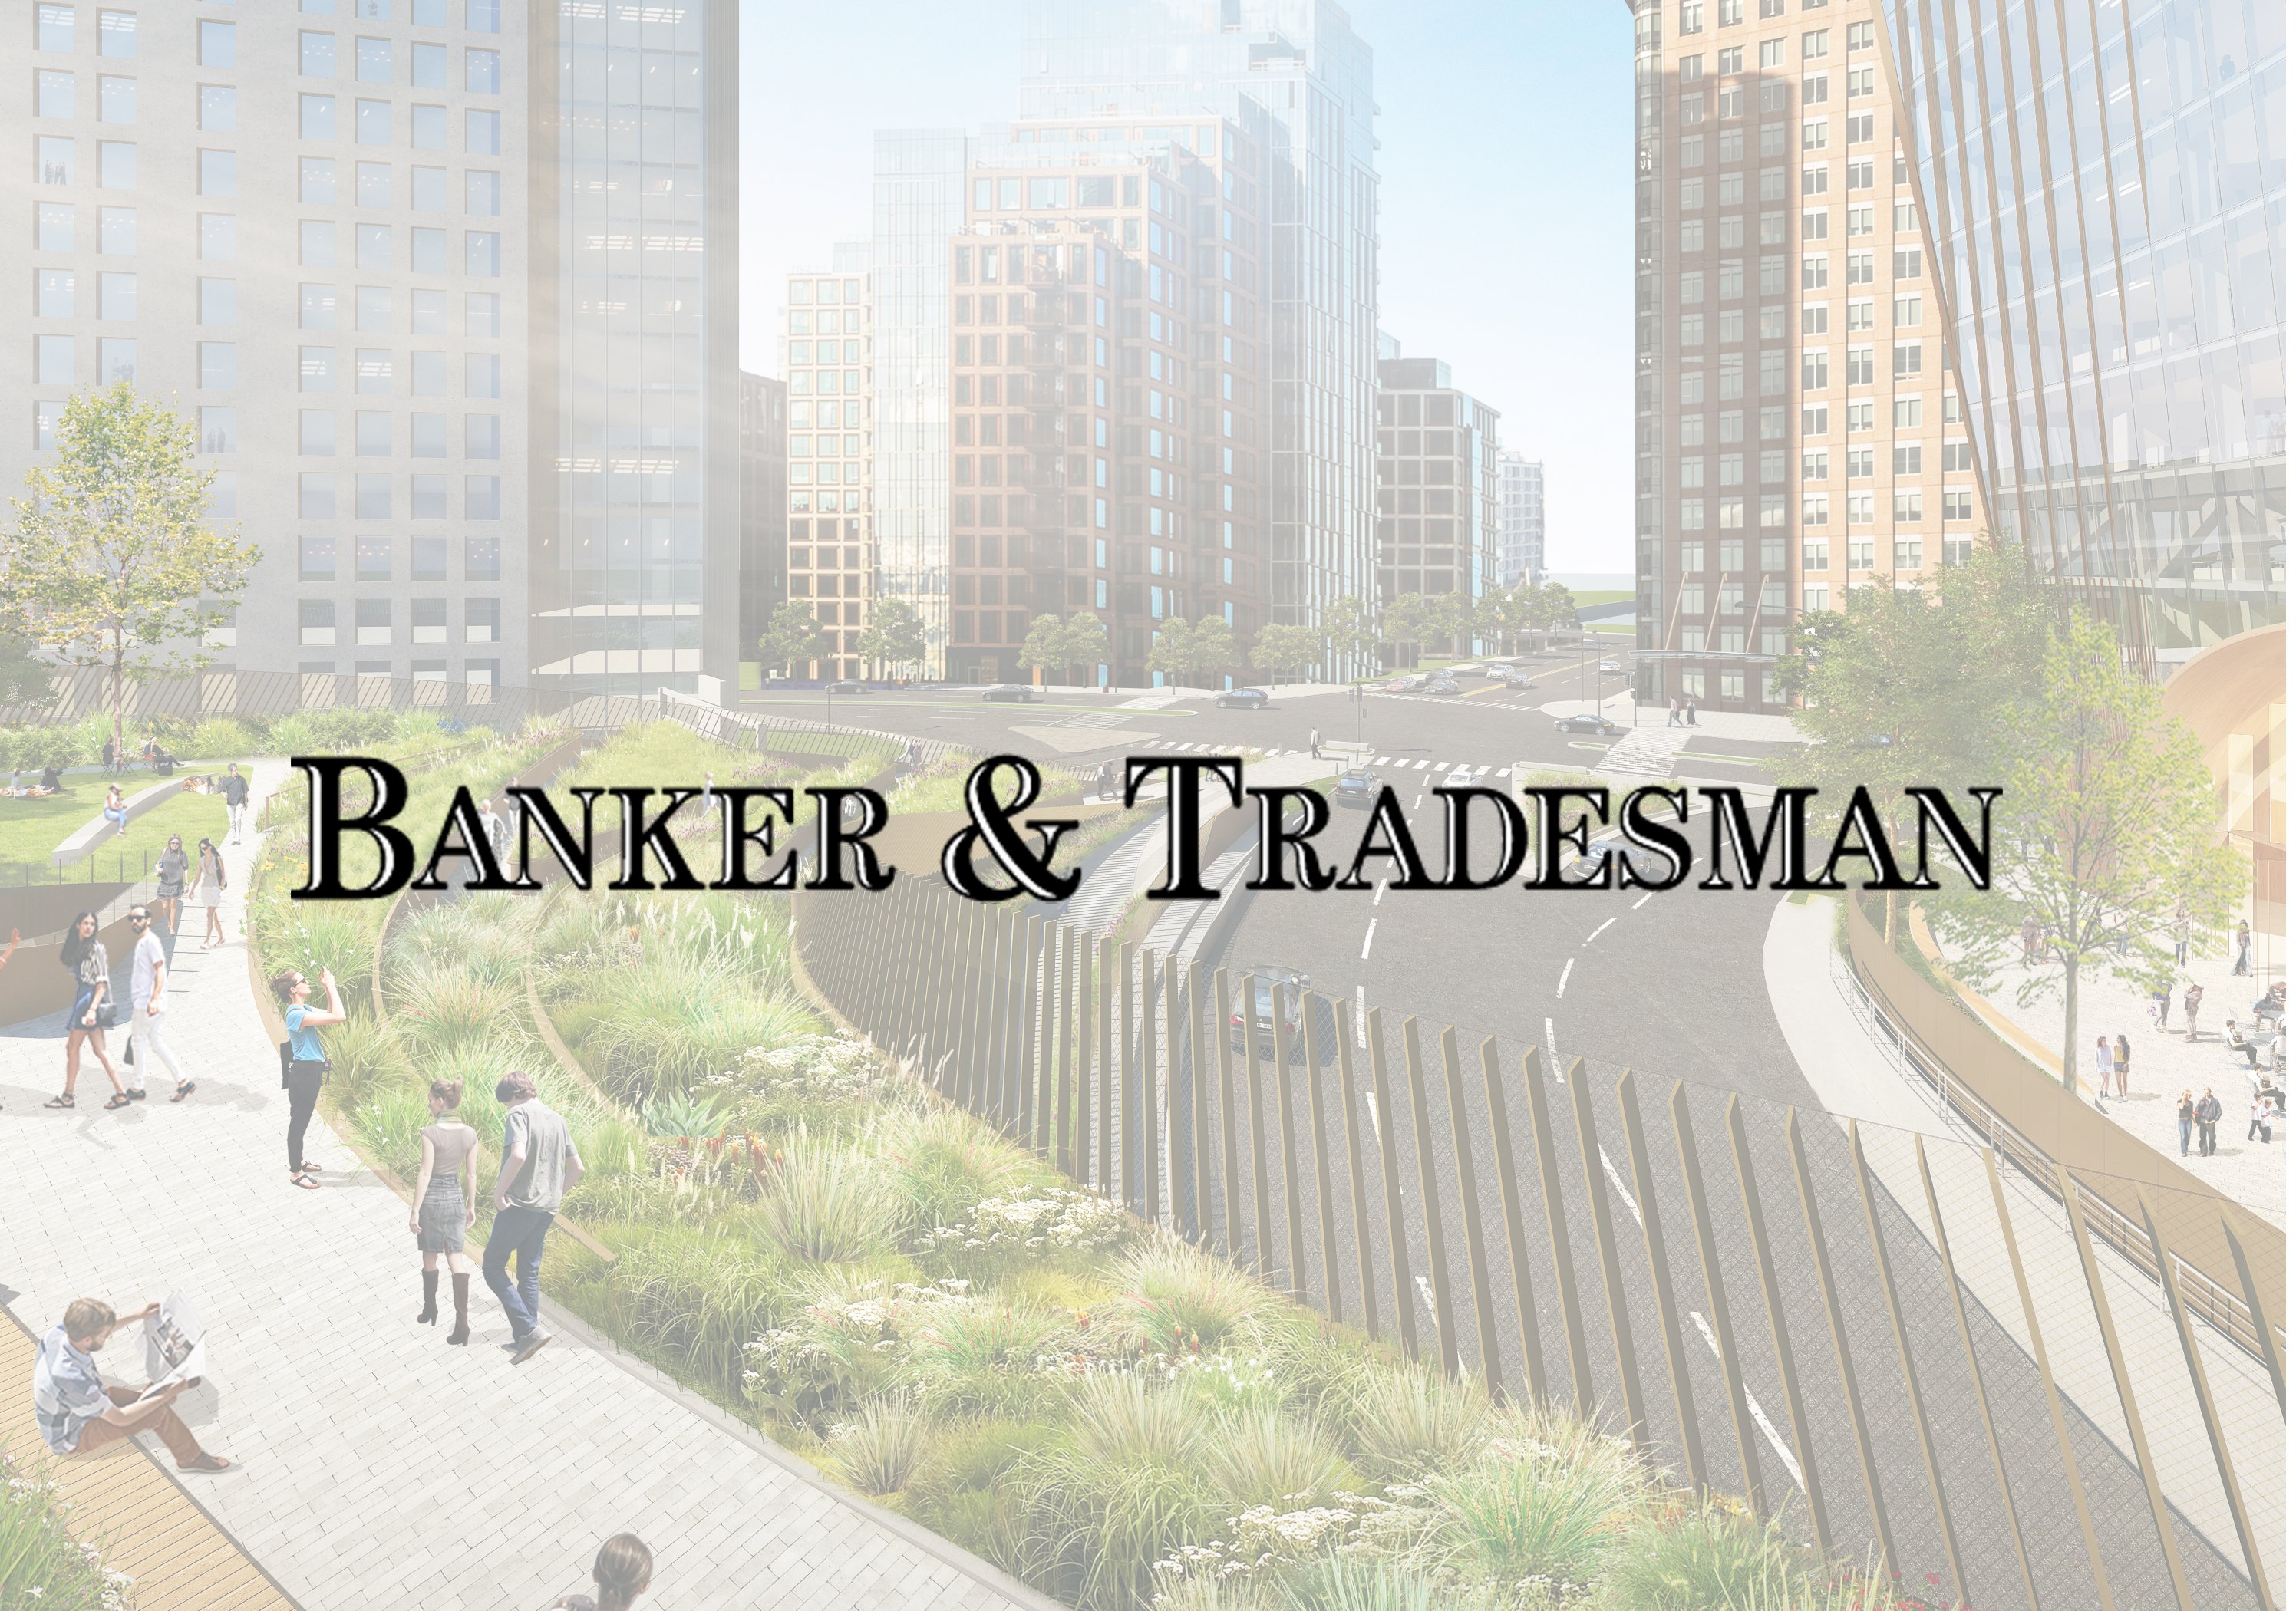 Banker & Tradesman: Seaport Lab Tower to Begin Construction Q4